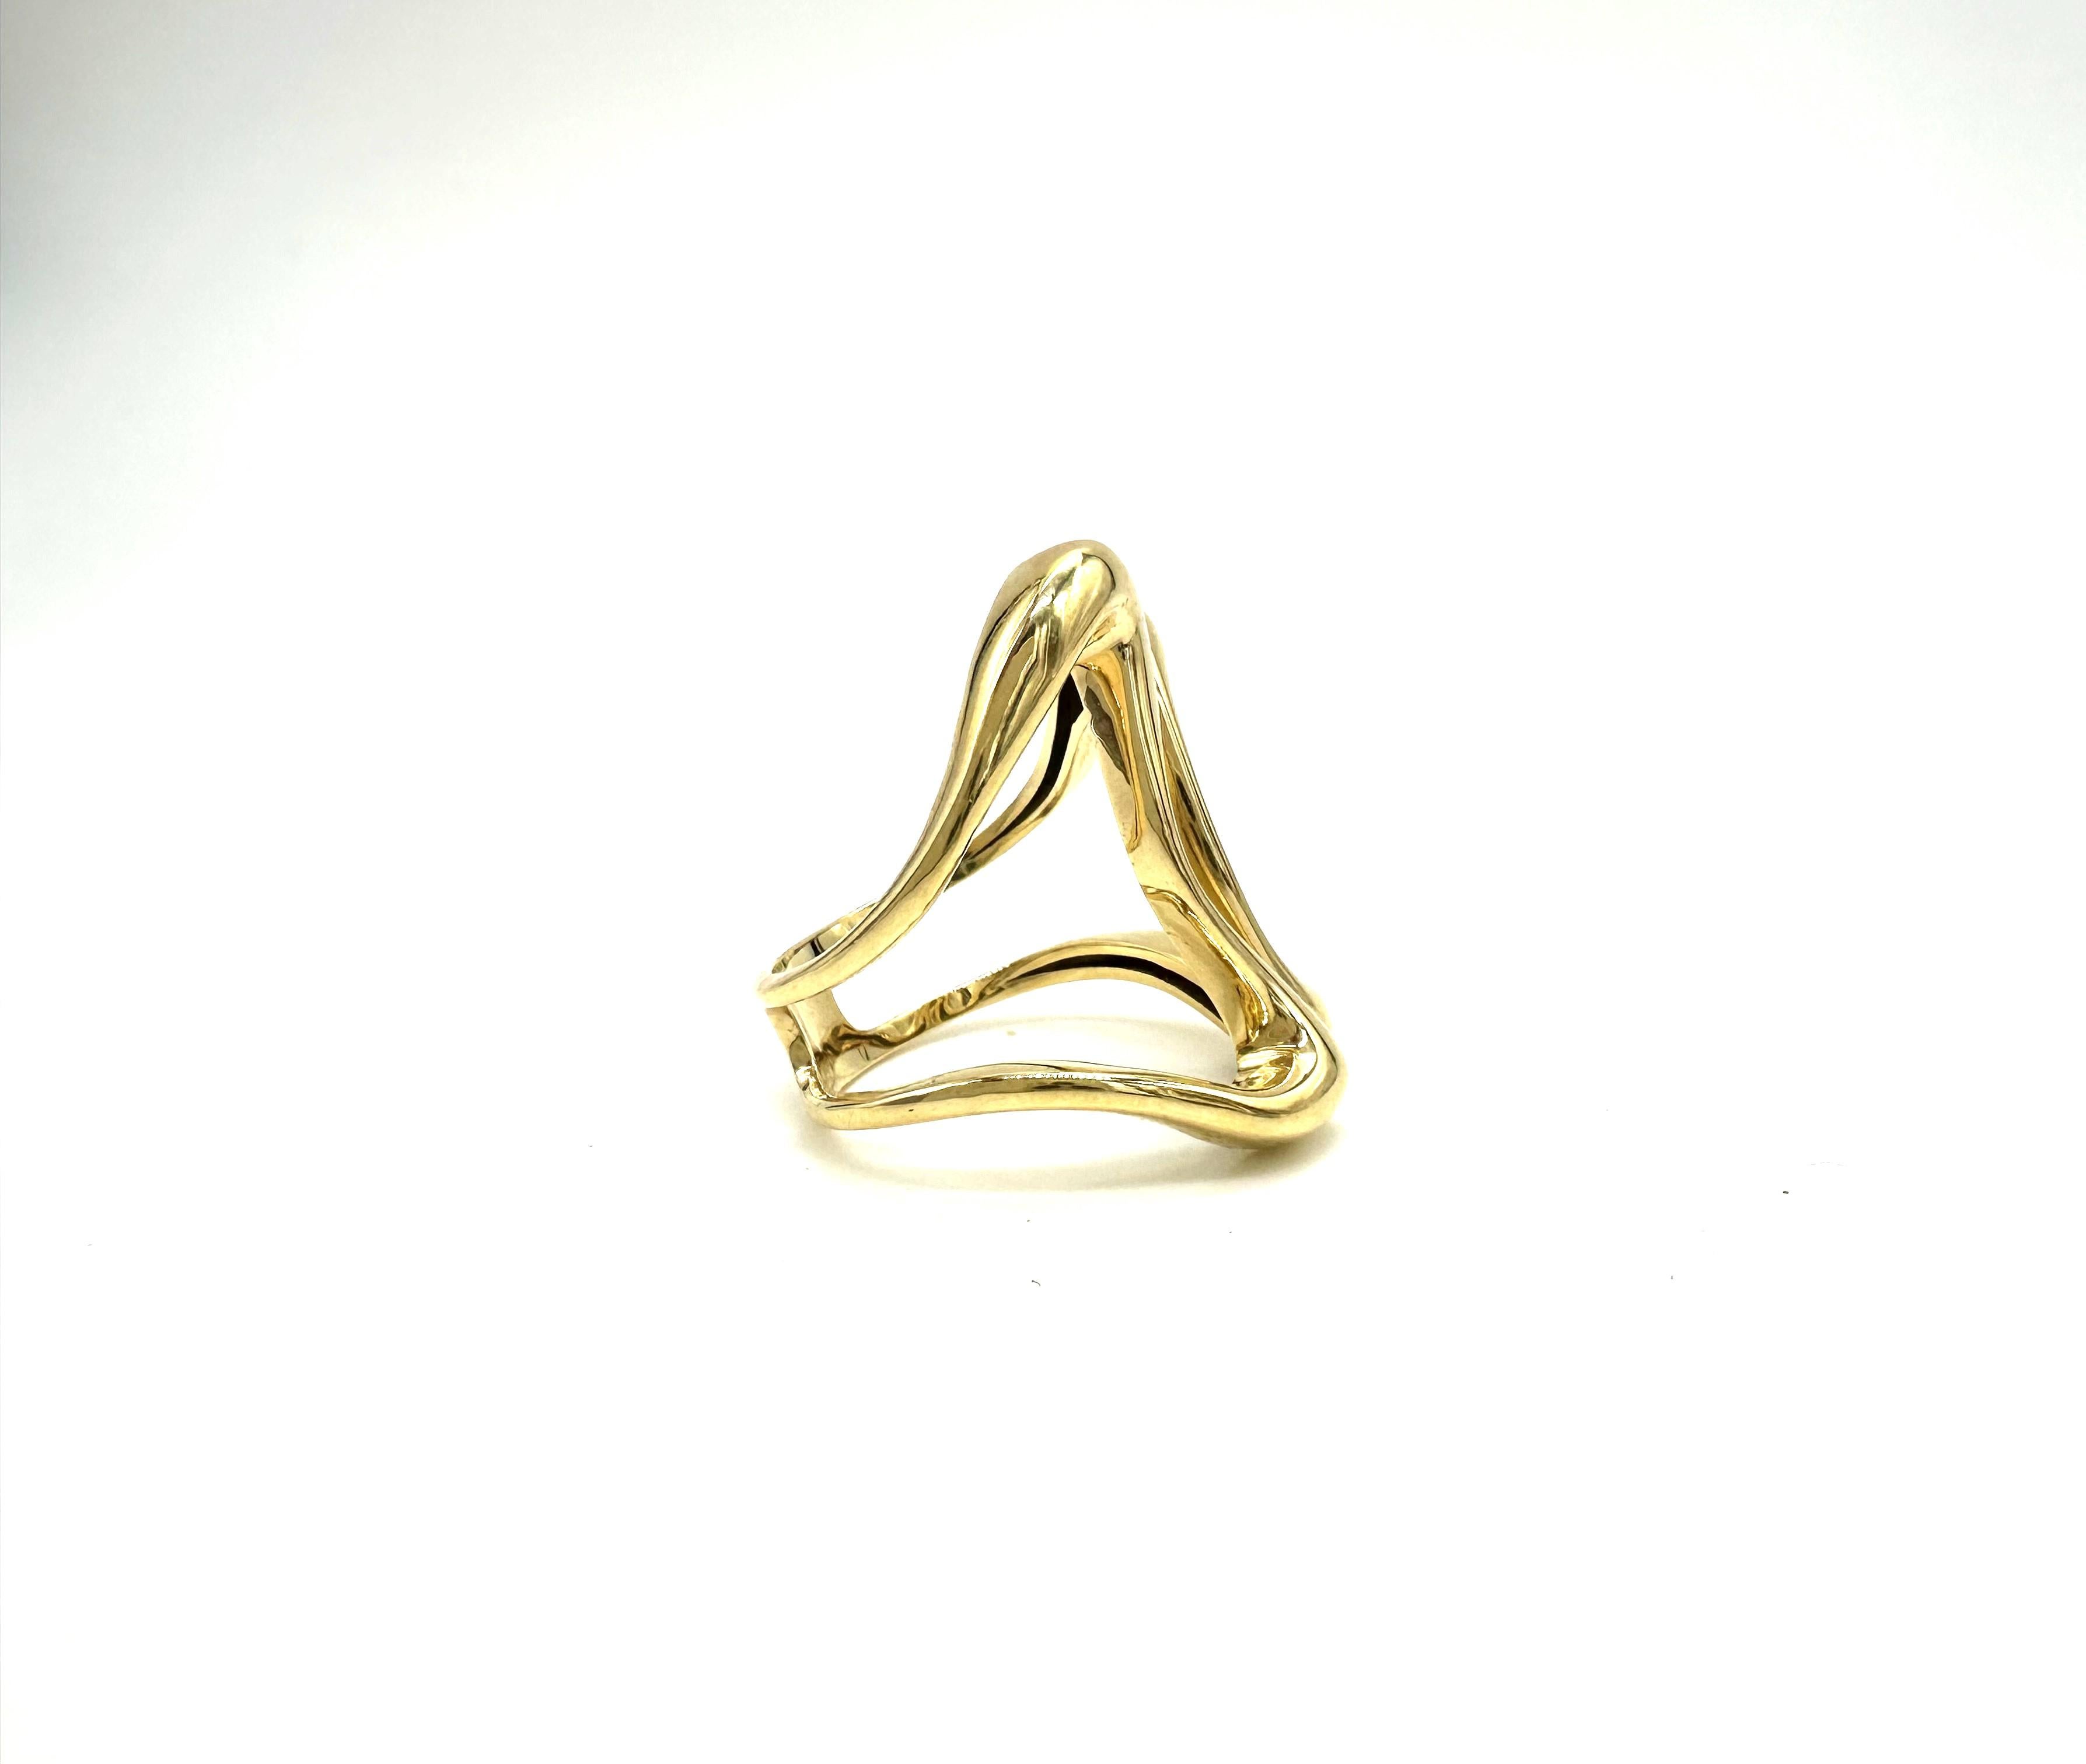 Sintra, a collection born from the fusion between nature and gold. This ring is an invitation to explore the harmony of organic forms, capturing the fluid and graceful essence found in nature itself.
Like a river winding through the stones, the